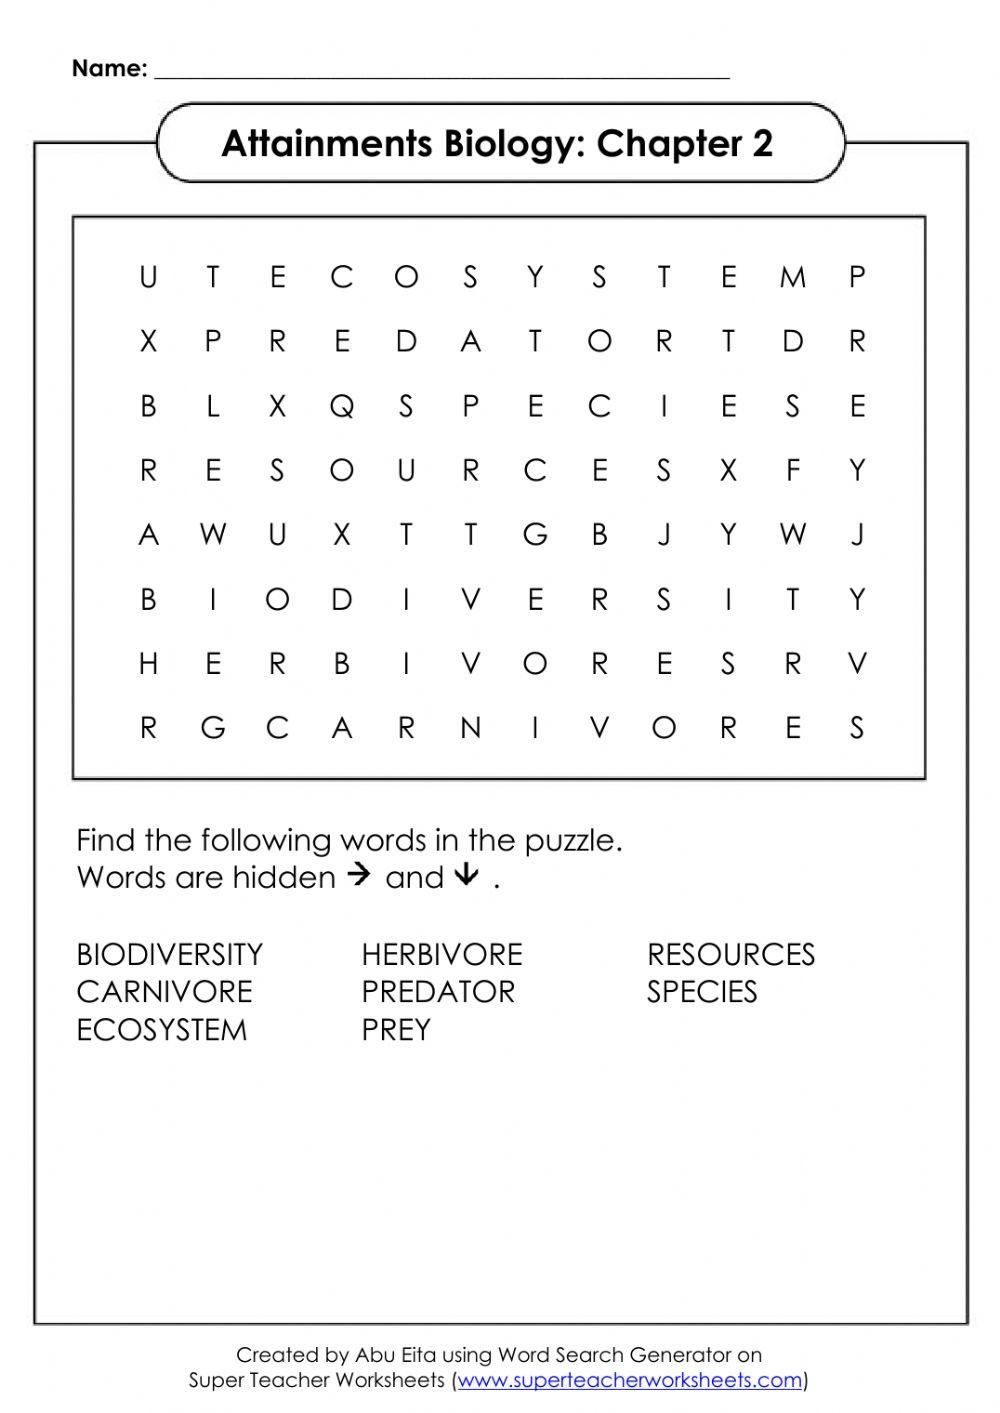 Competition Word Search - Easy